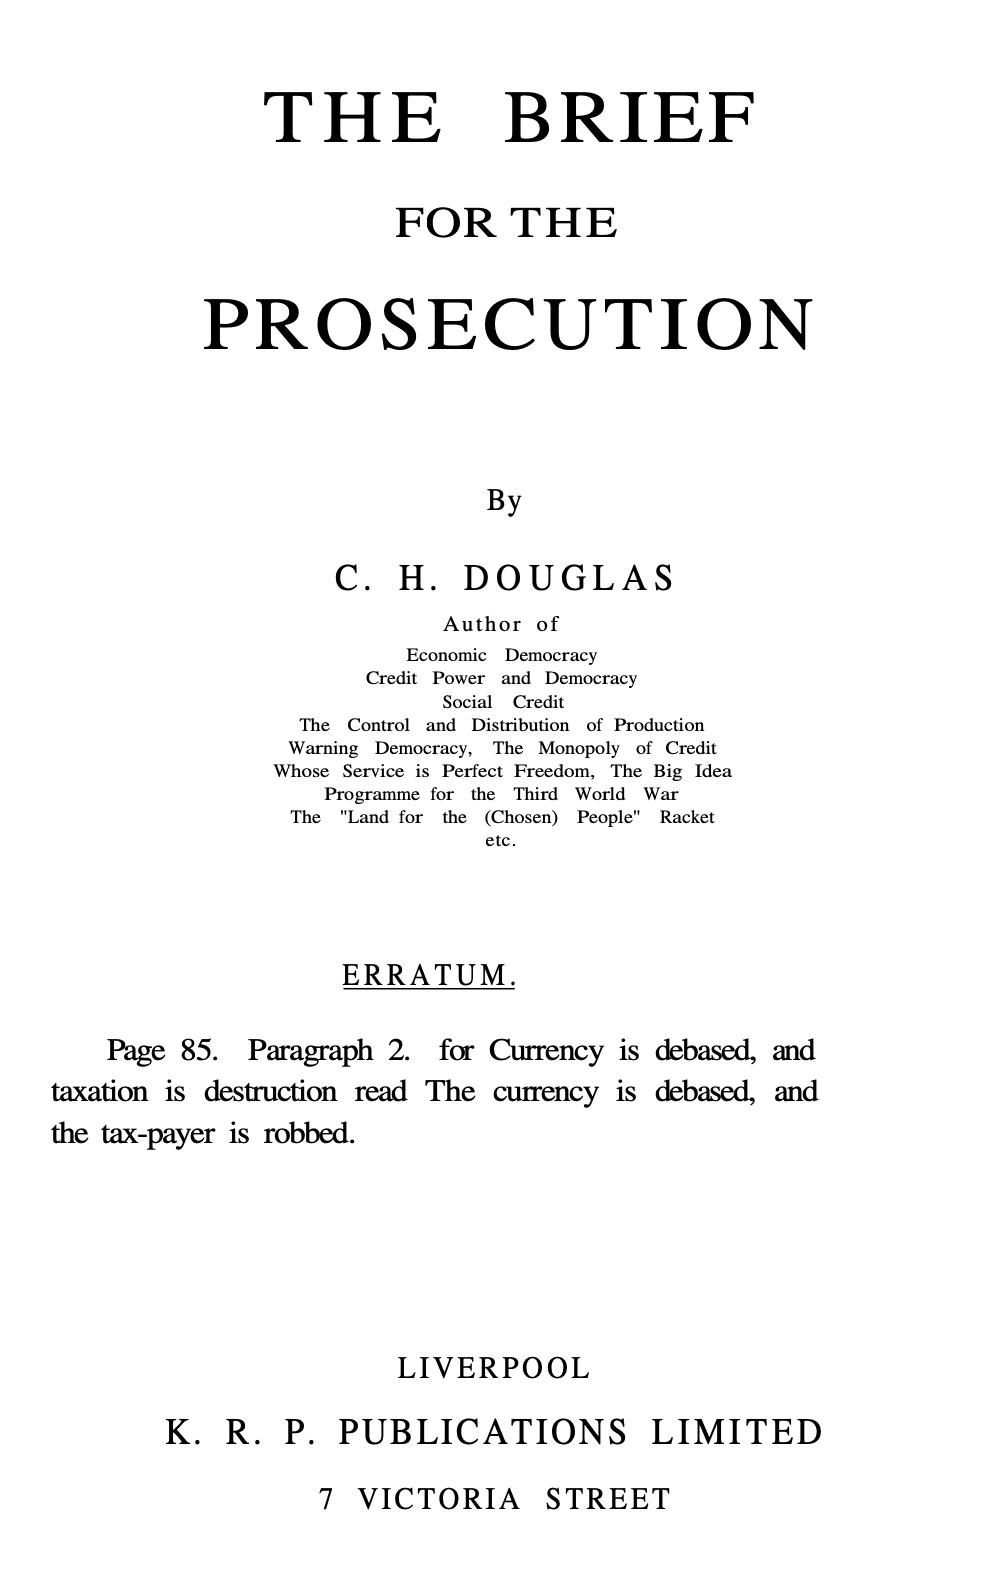 The Brief for the Prosecution (1945) by Clifford Hugh Douglas, 1879-1952